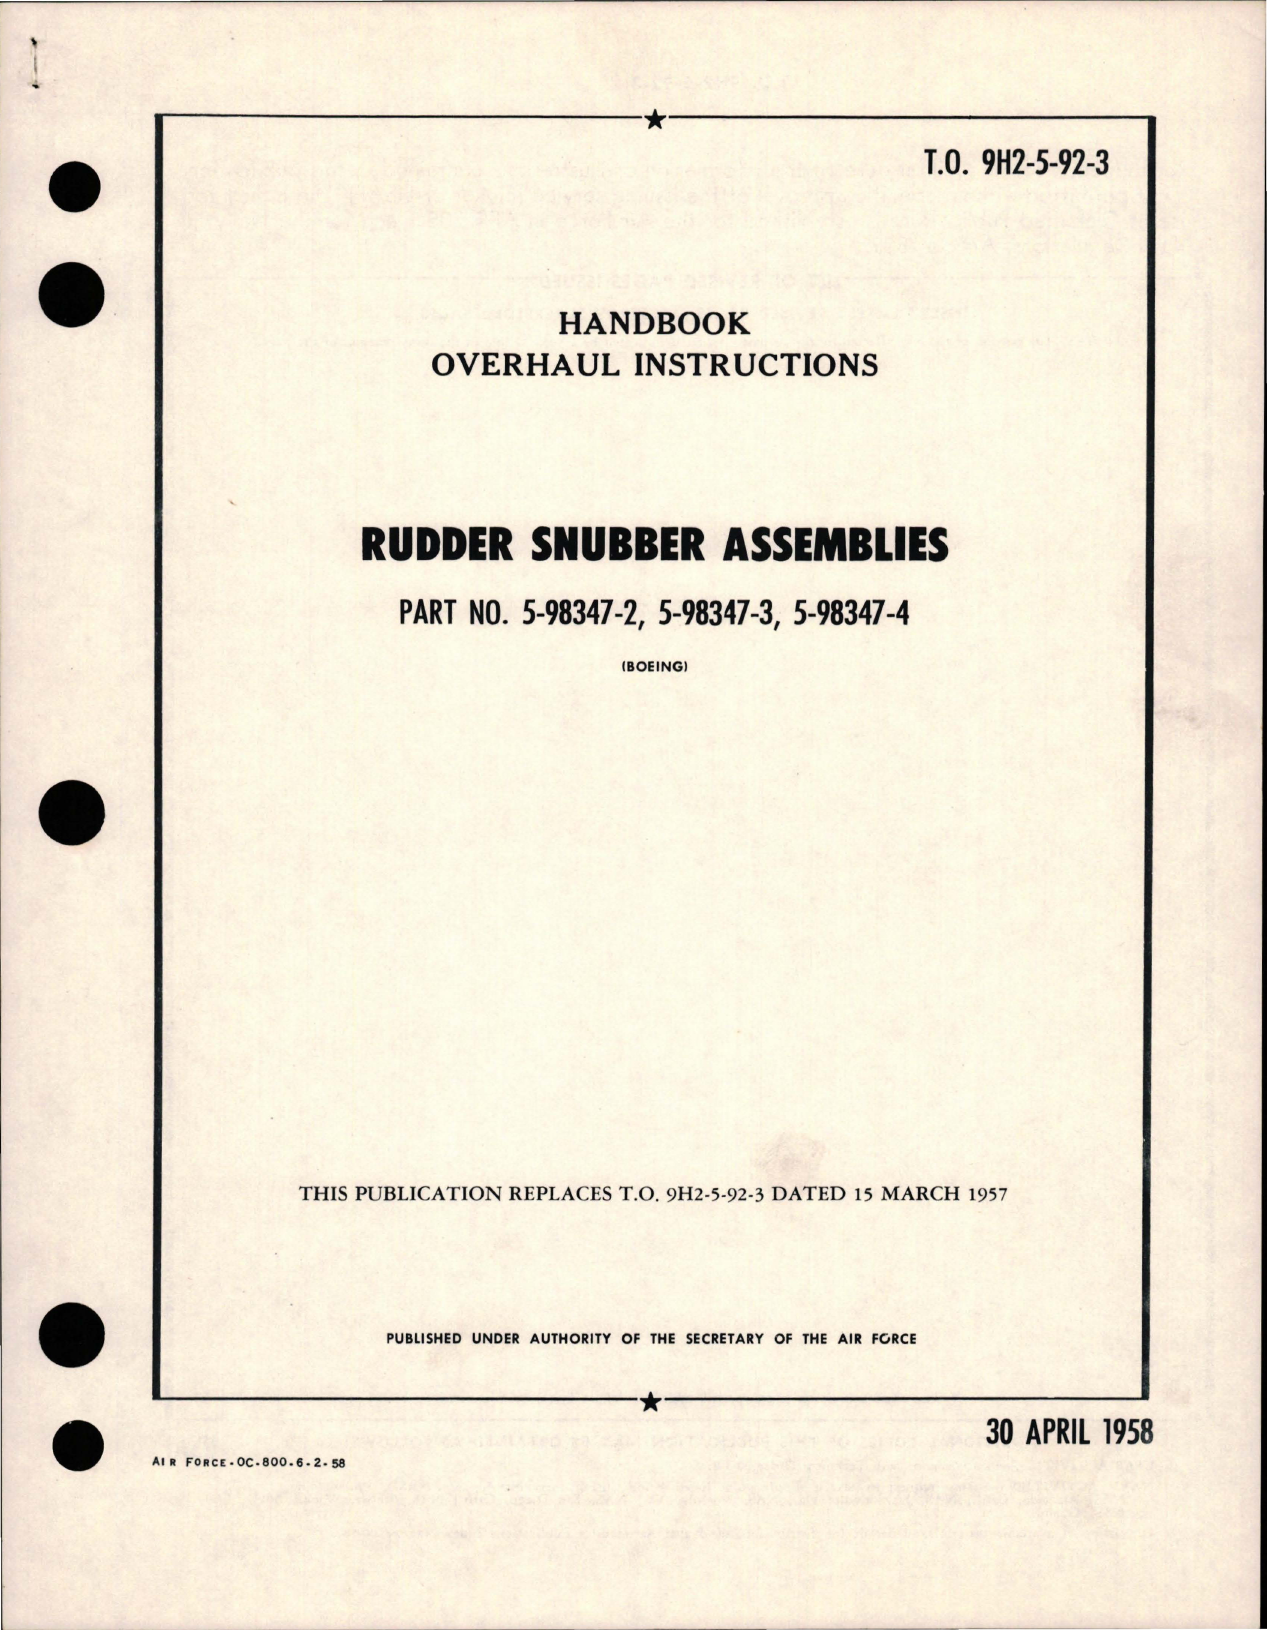 Sample page 1 from AirCorps Library document: Overhaul Instructions for Rudder Snubber Assembly - Part 5-98347-2, 5-98347-3, and 5-98347-4 